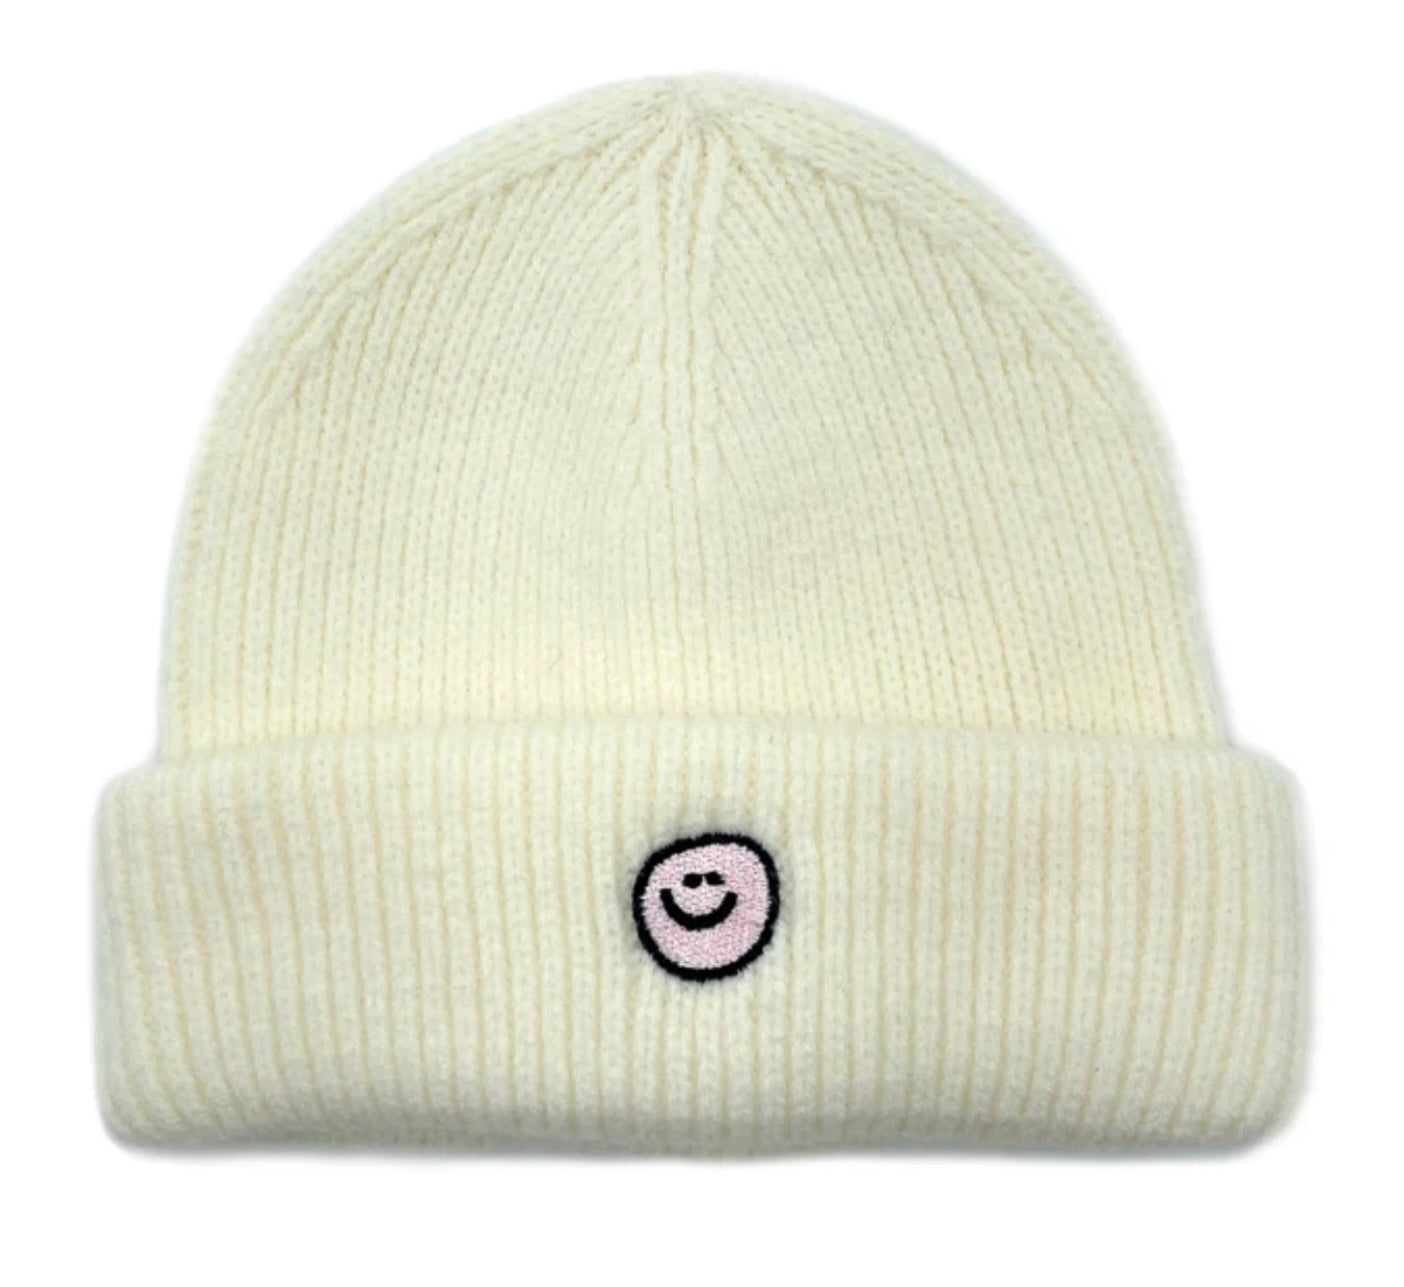 EMBROIDERED BEANIE - IVORY